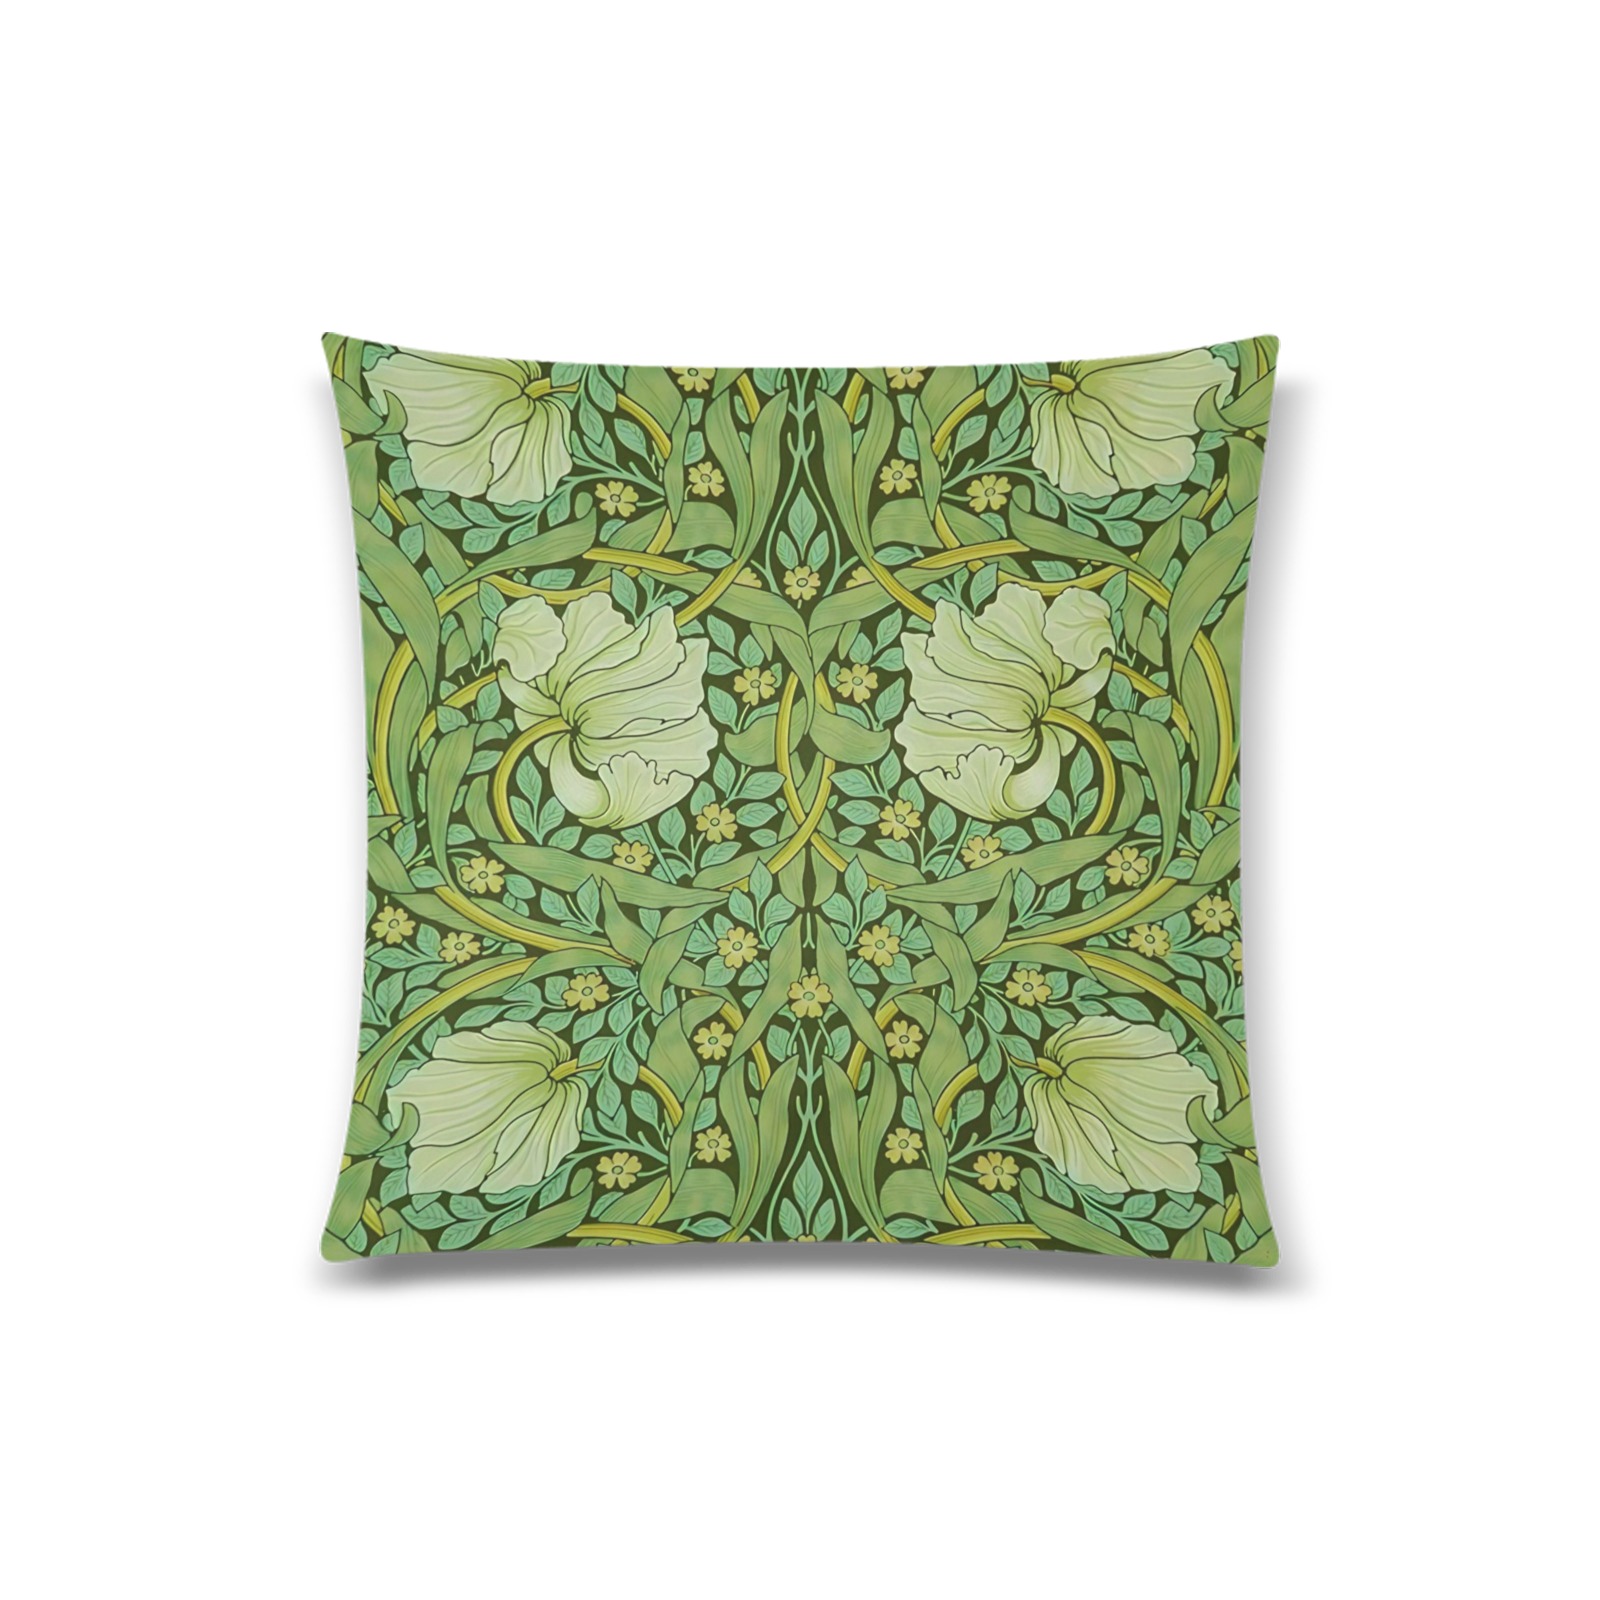 William Morris - Pimpernel Custom Zippered Pillow Case 20"x20"(Twin Sides)